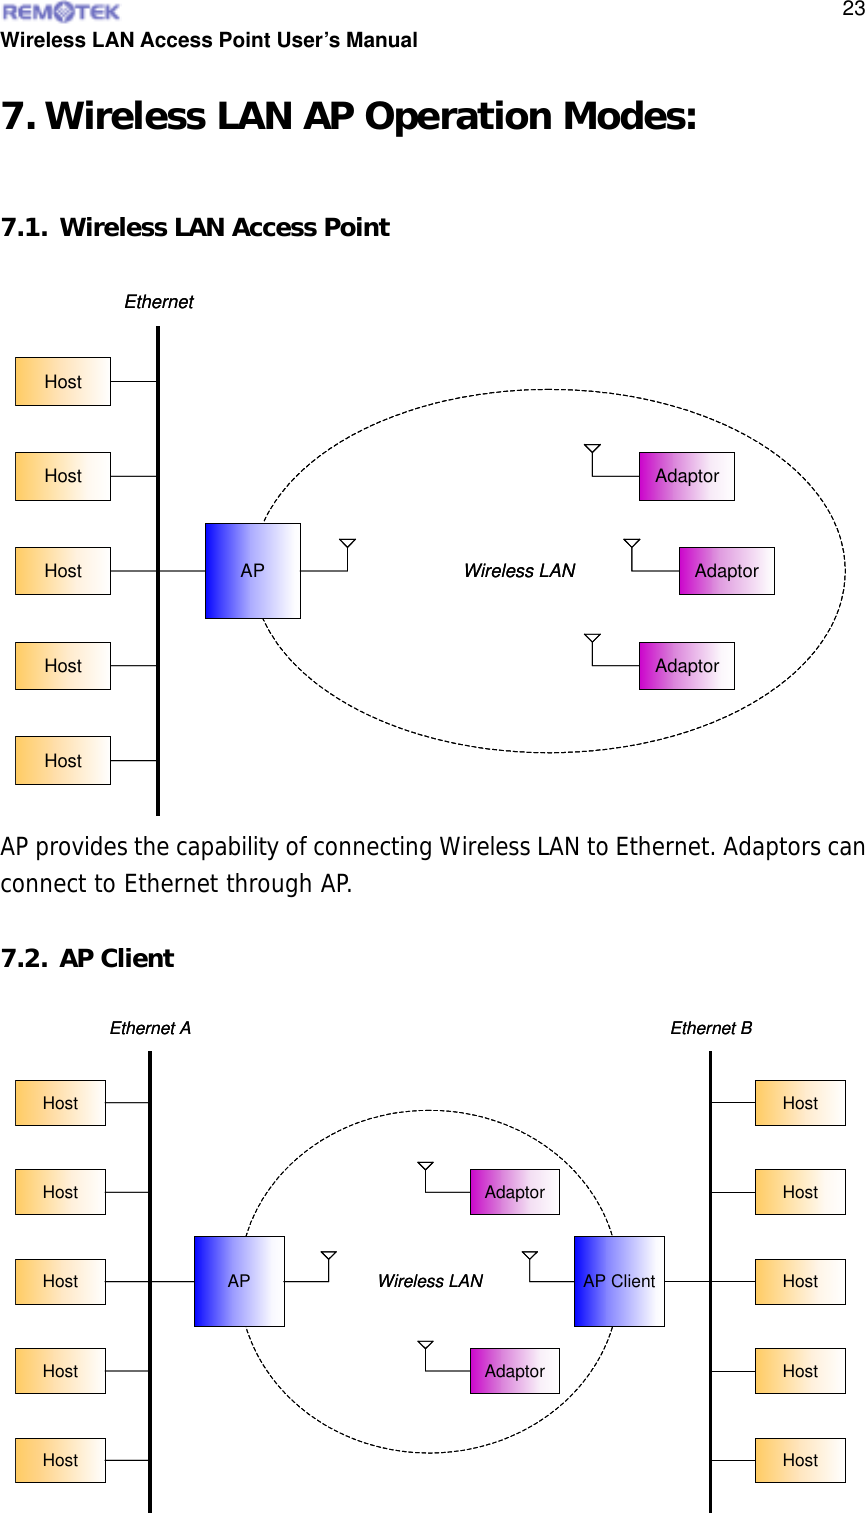  Wireless LAN Access Point User’s Manual  237. Wireless LAN AP Operation Modes:  7.1. Wireless LAN Access Point AP provides the capability of connecting Wireless LAN to Ethernet. Adaptors can connect to Ethernet through AP.  7.2. AP Client Wireless LAN APHostHostHostHostHostEthernetAdaptorAdaptorAdaptorWireless LAN APHostHostHostHostHostEthernetAdaptorAdaptorAdaptorWireless LANAPHostHostHostHostHostEthernet AAdaptorAdaptorAP ClientEthernet BHostHostHostHostHostWireless LANAPHostHostHostHostHostEthernet AAdaptorAdaptorAP ClientEthernet BHostHostHostHostHost